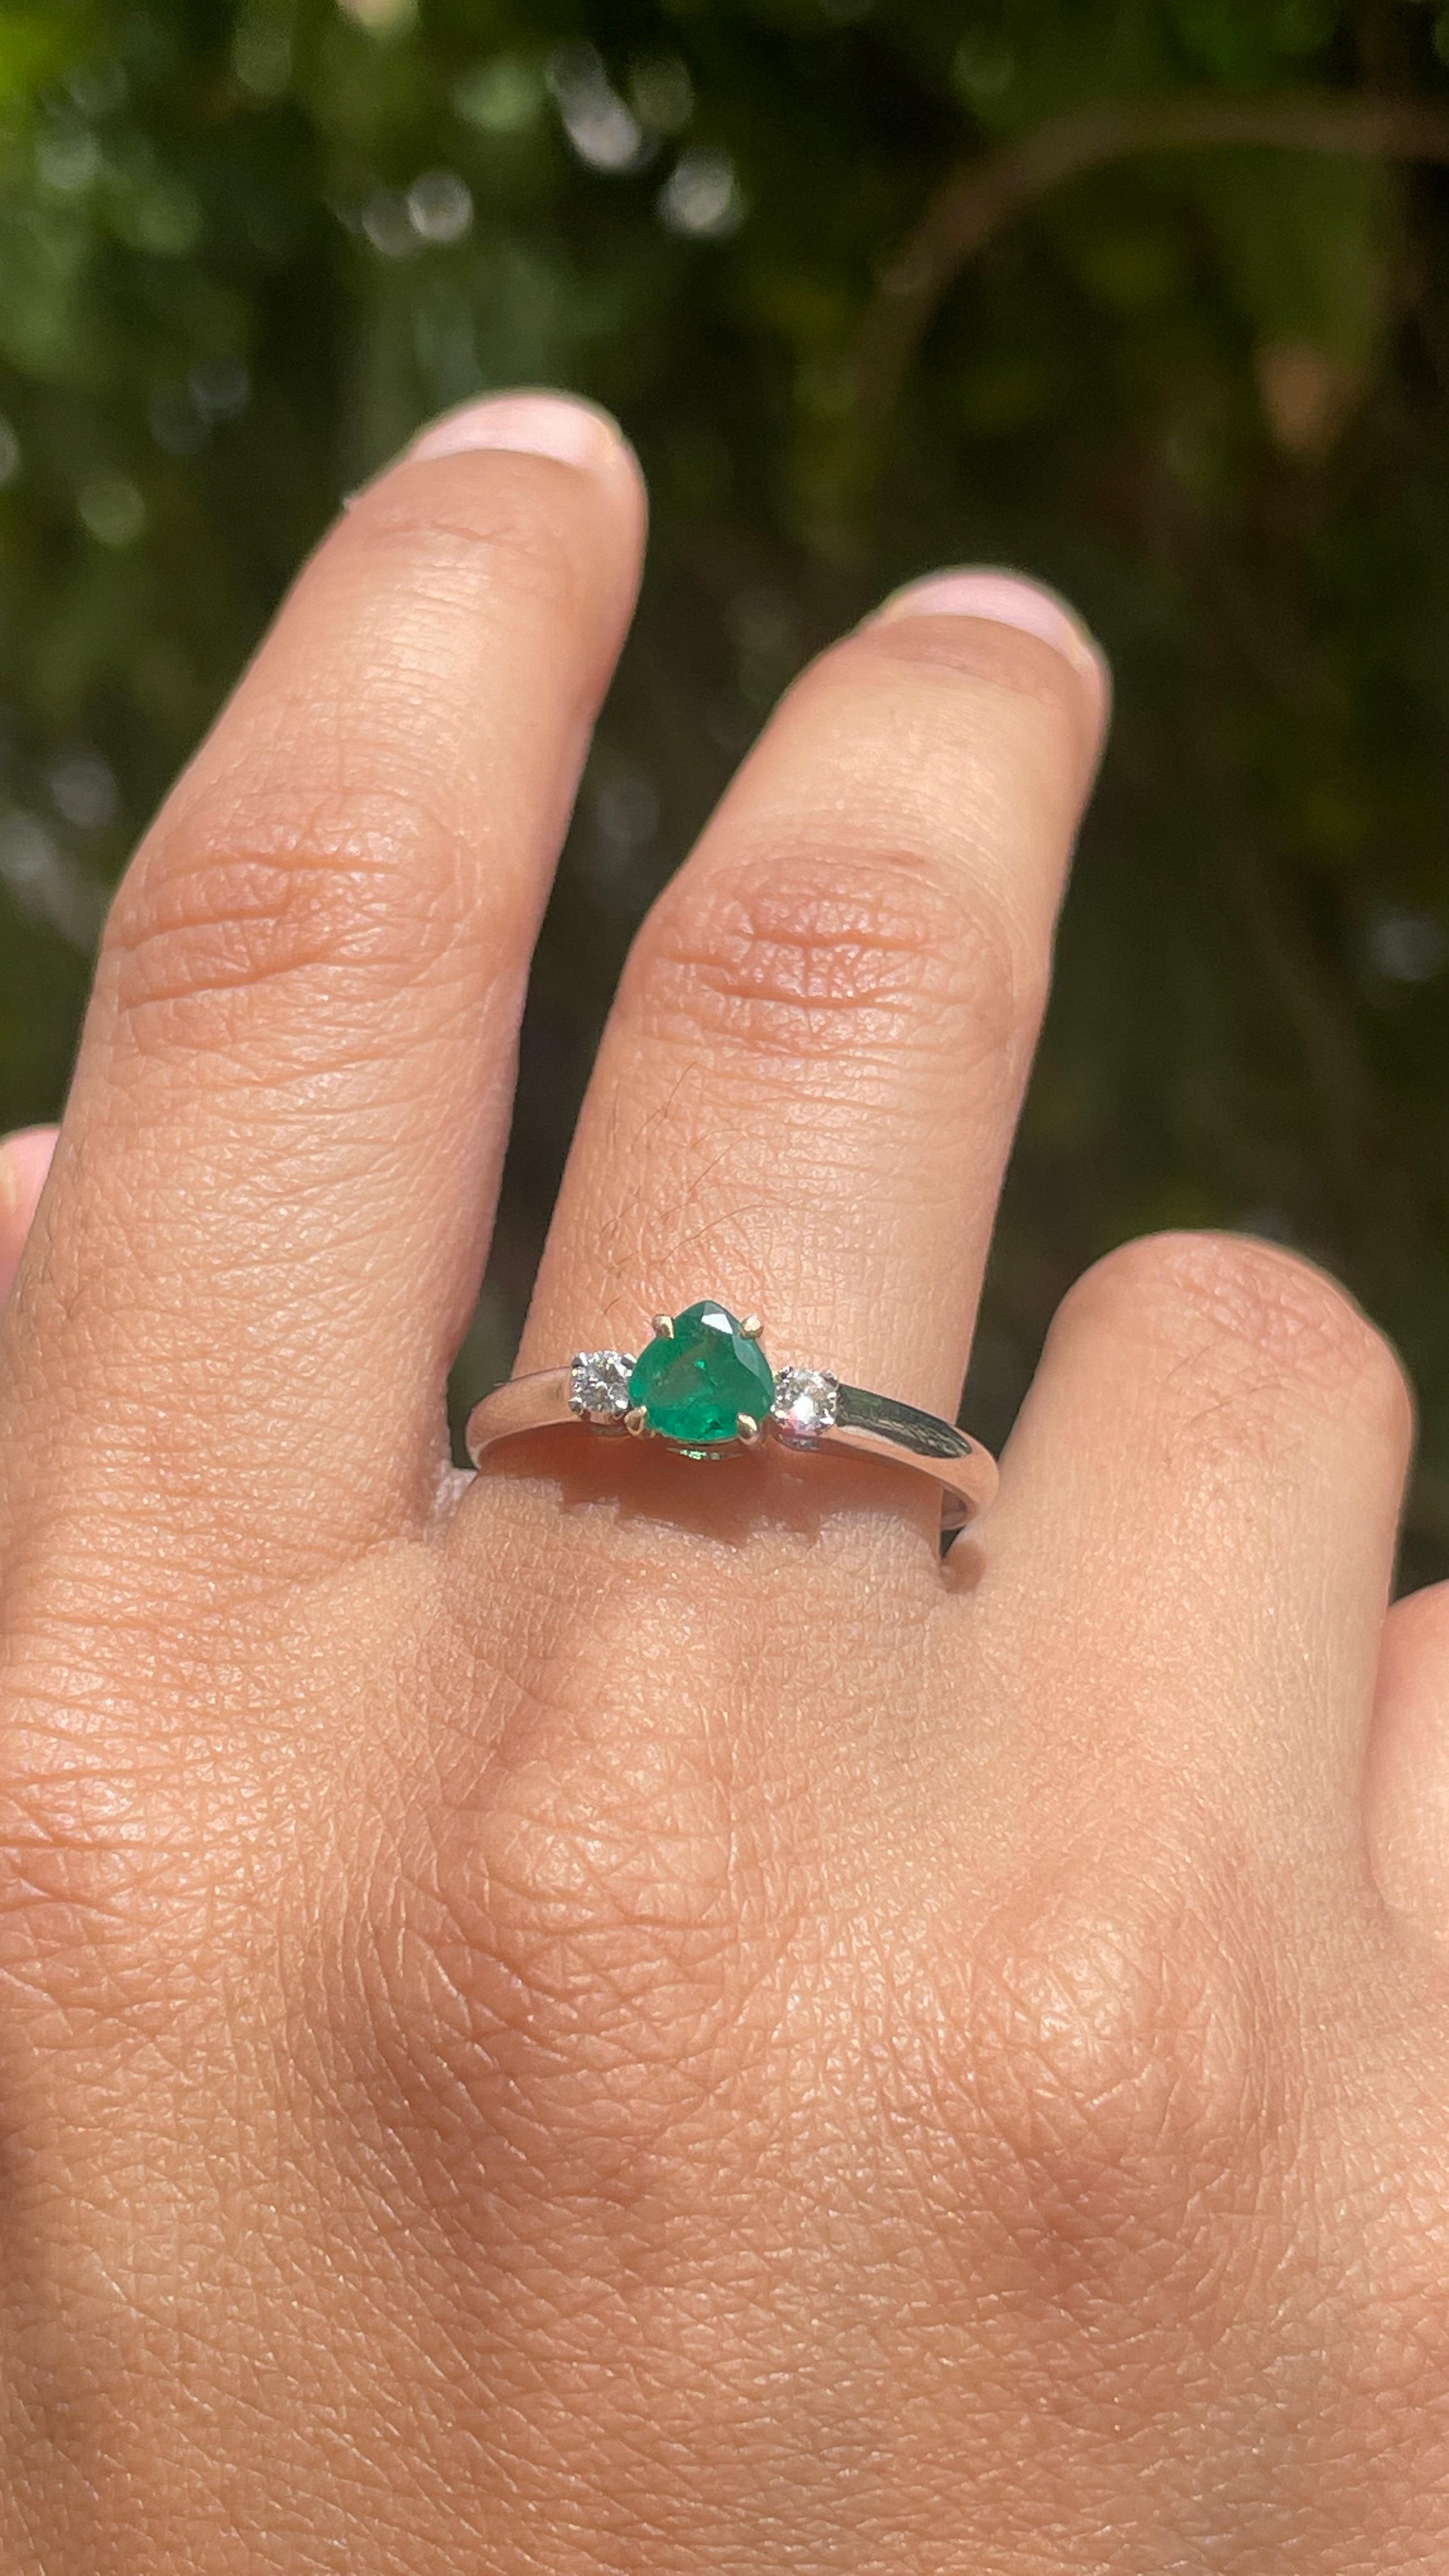 For Sale:  18k Solid White Gold Emerald Ring with Diamonds 10